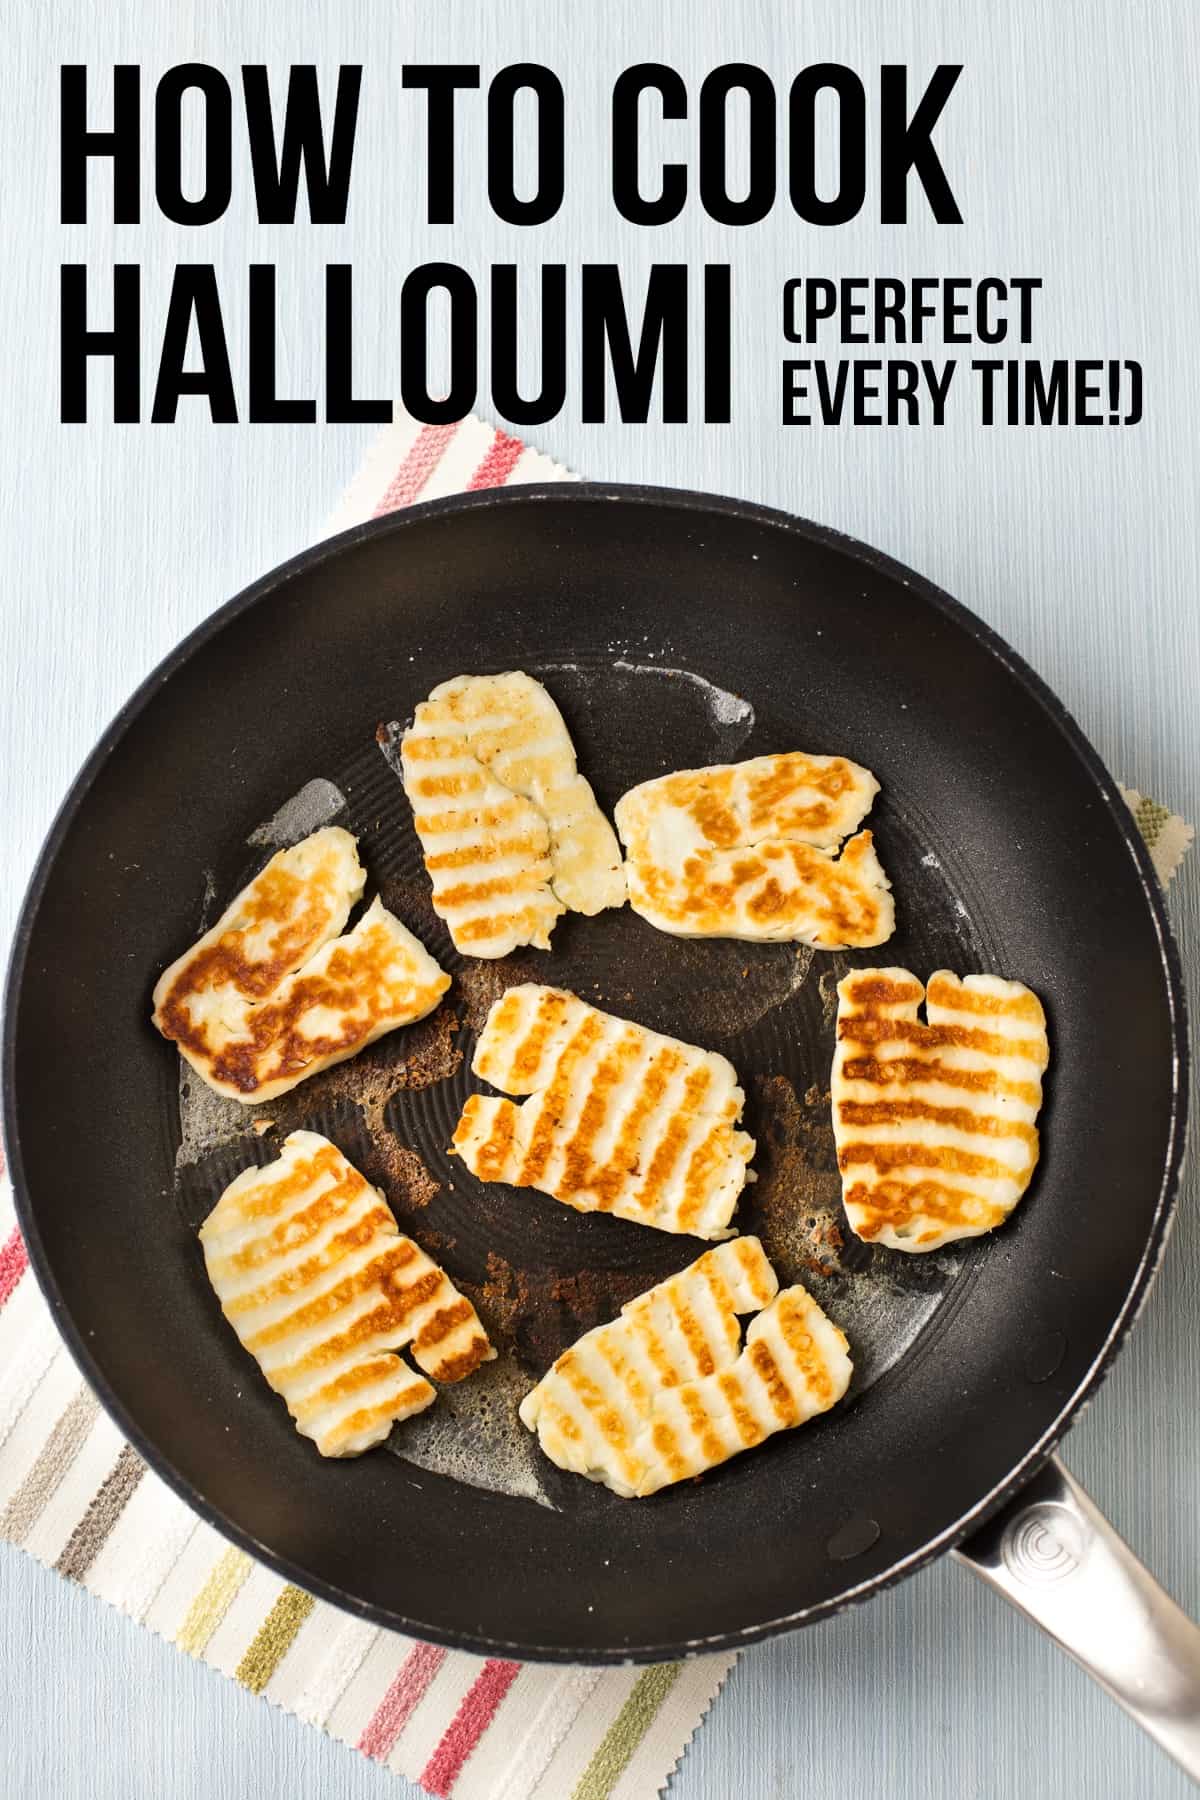 Slices of fried halloumi in a frying pan.